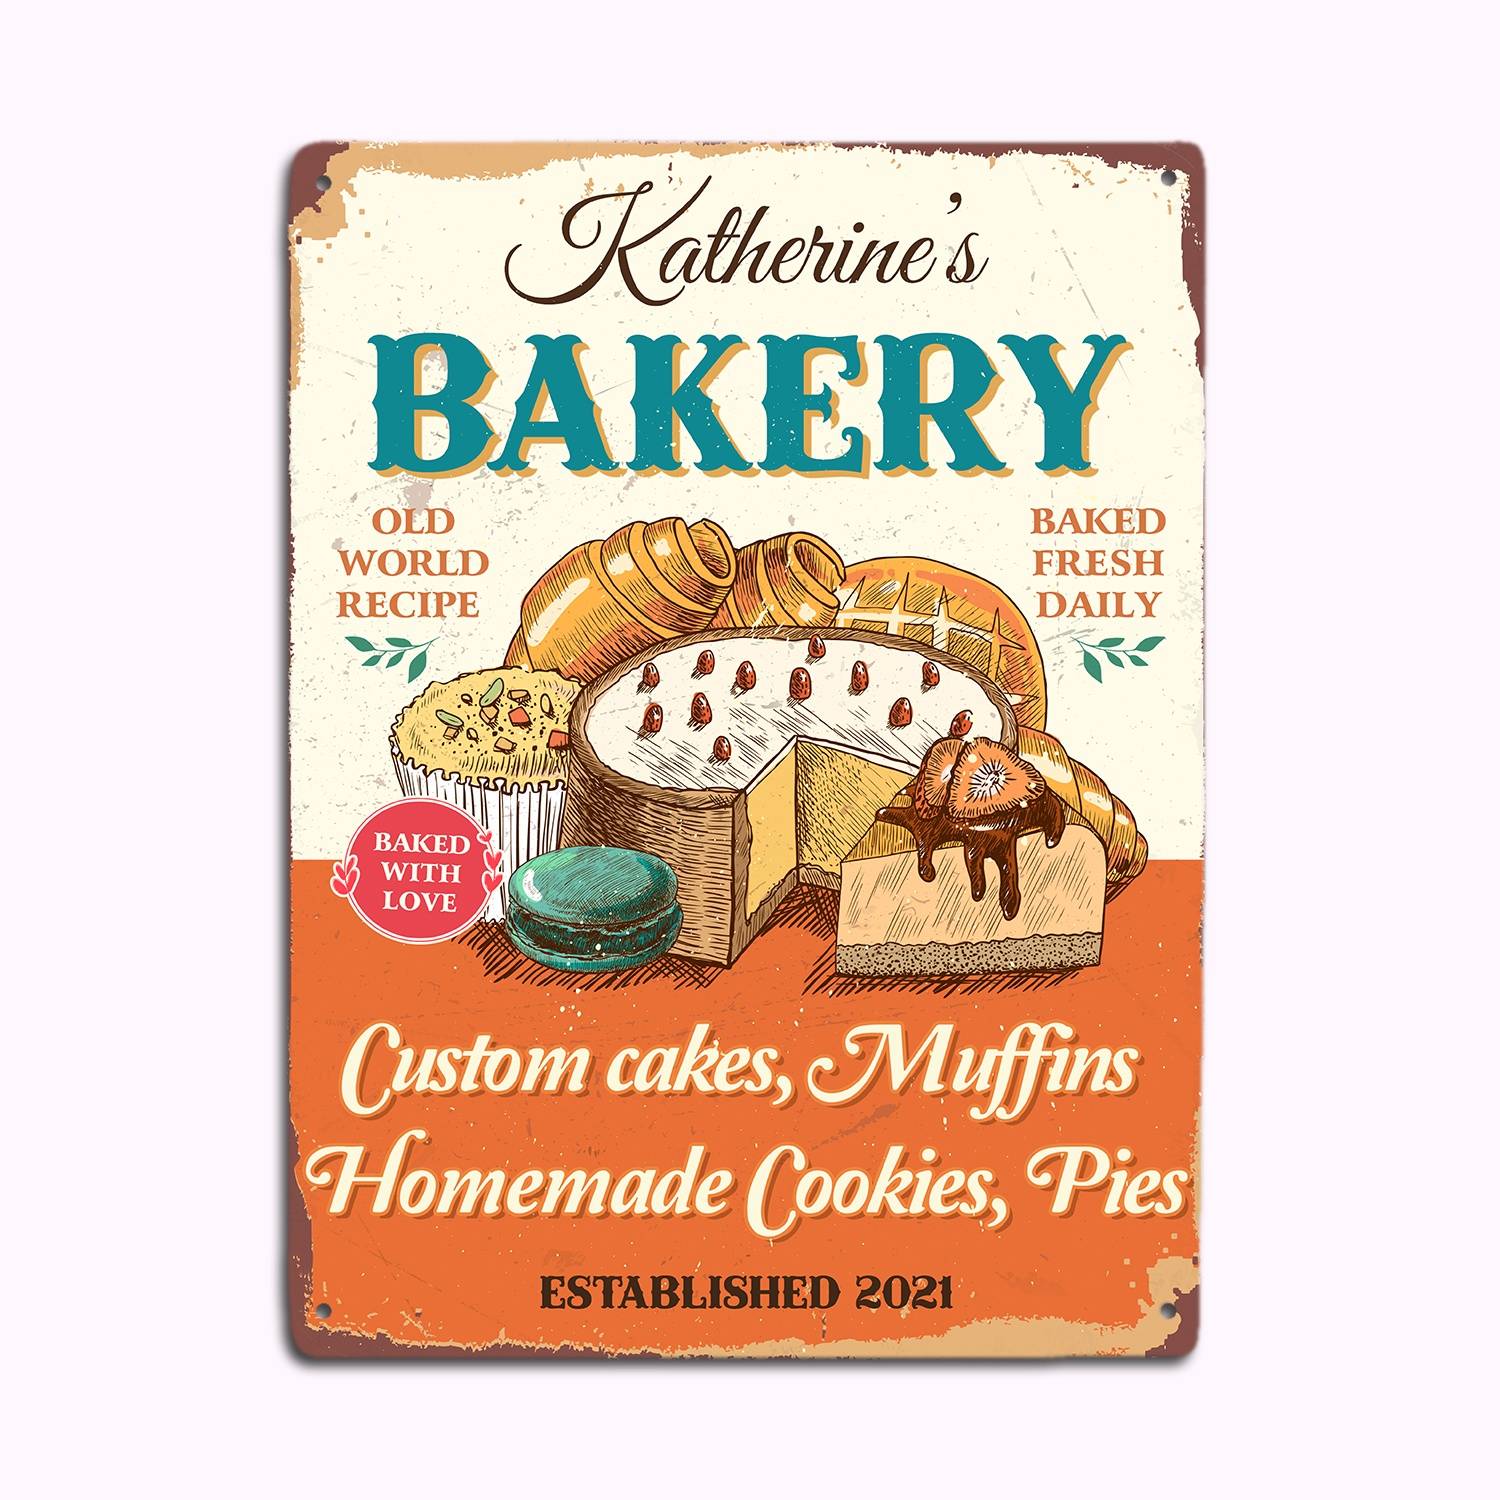 The lovely metal bakery sign can be personalized with your mom's name. With the orange color, this sign will bring a fresh feel to her kitchen.